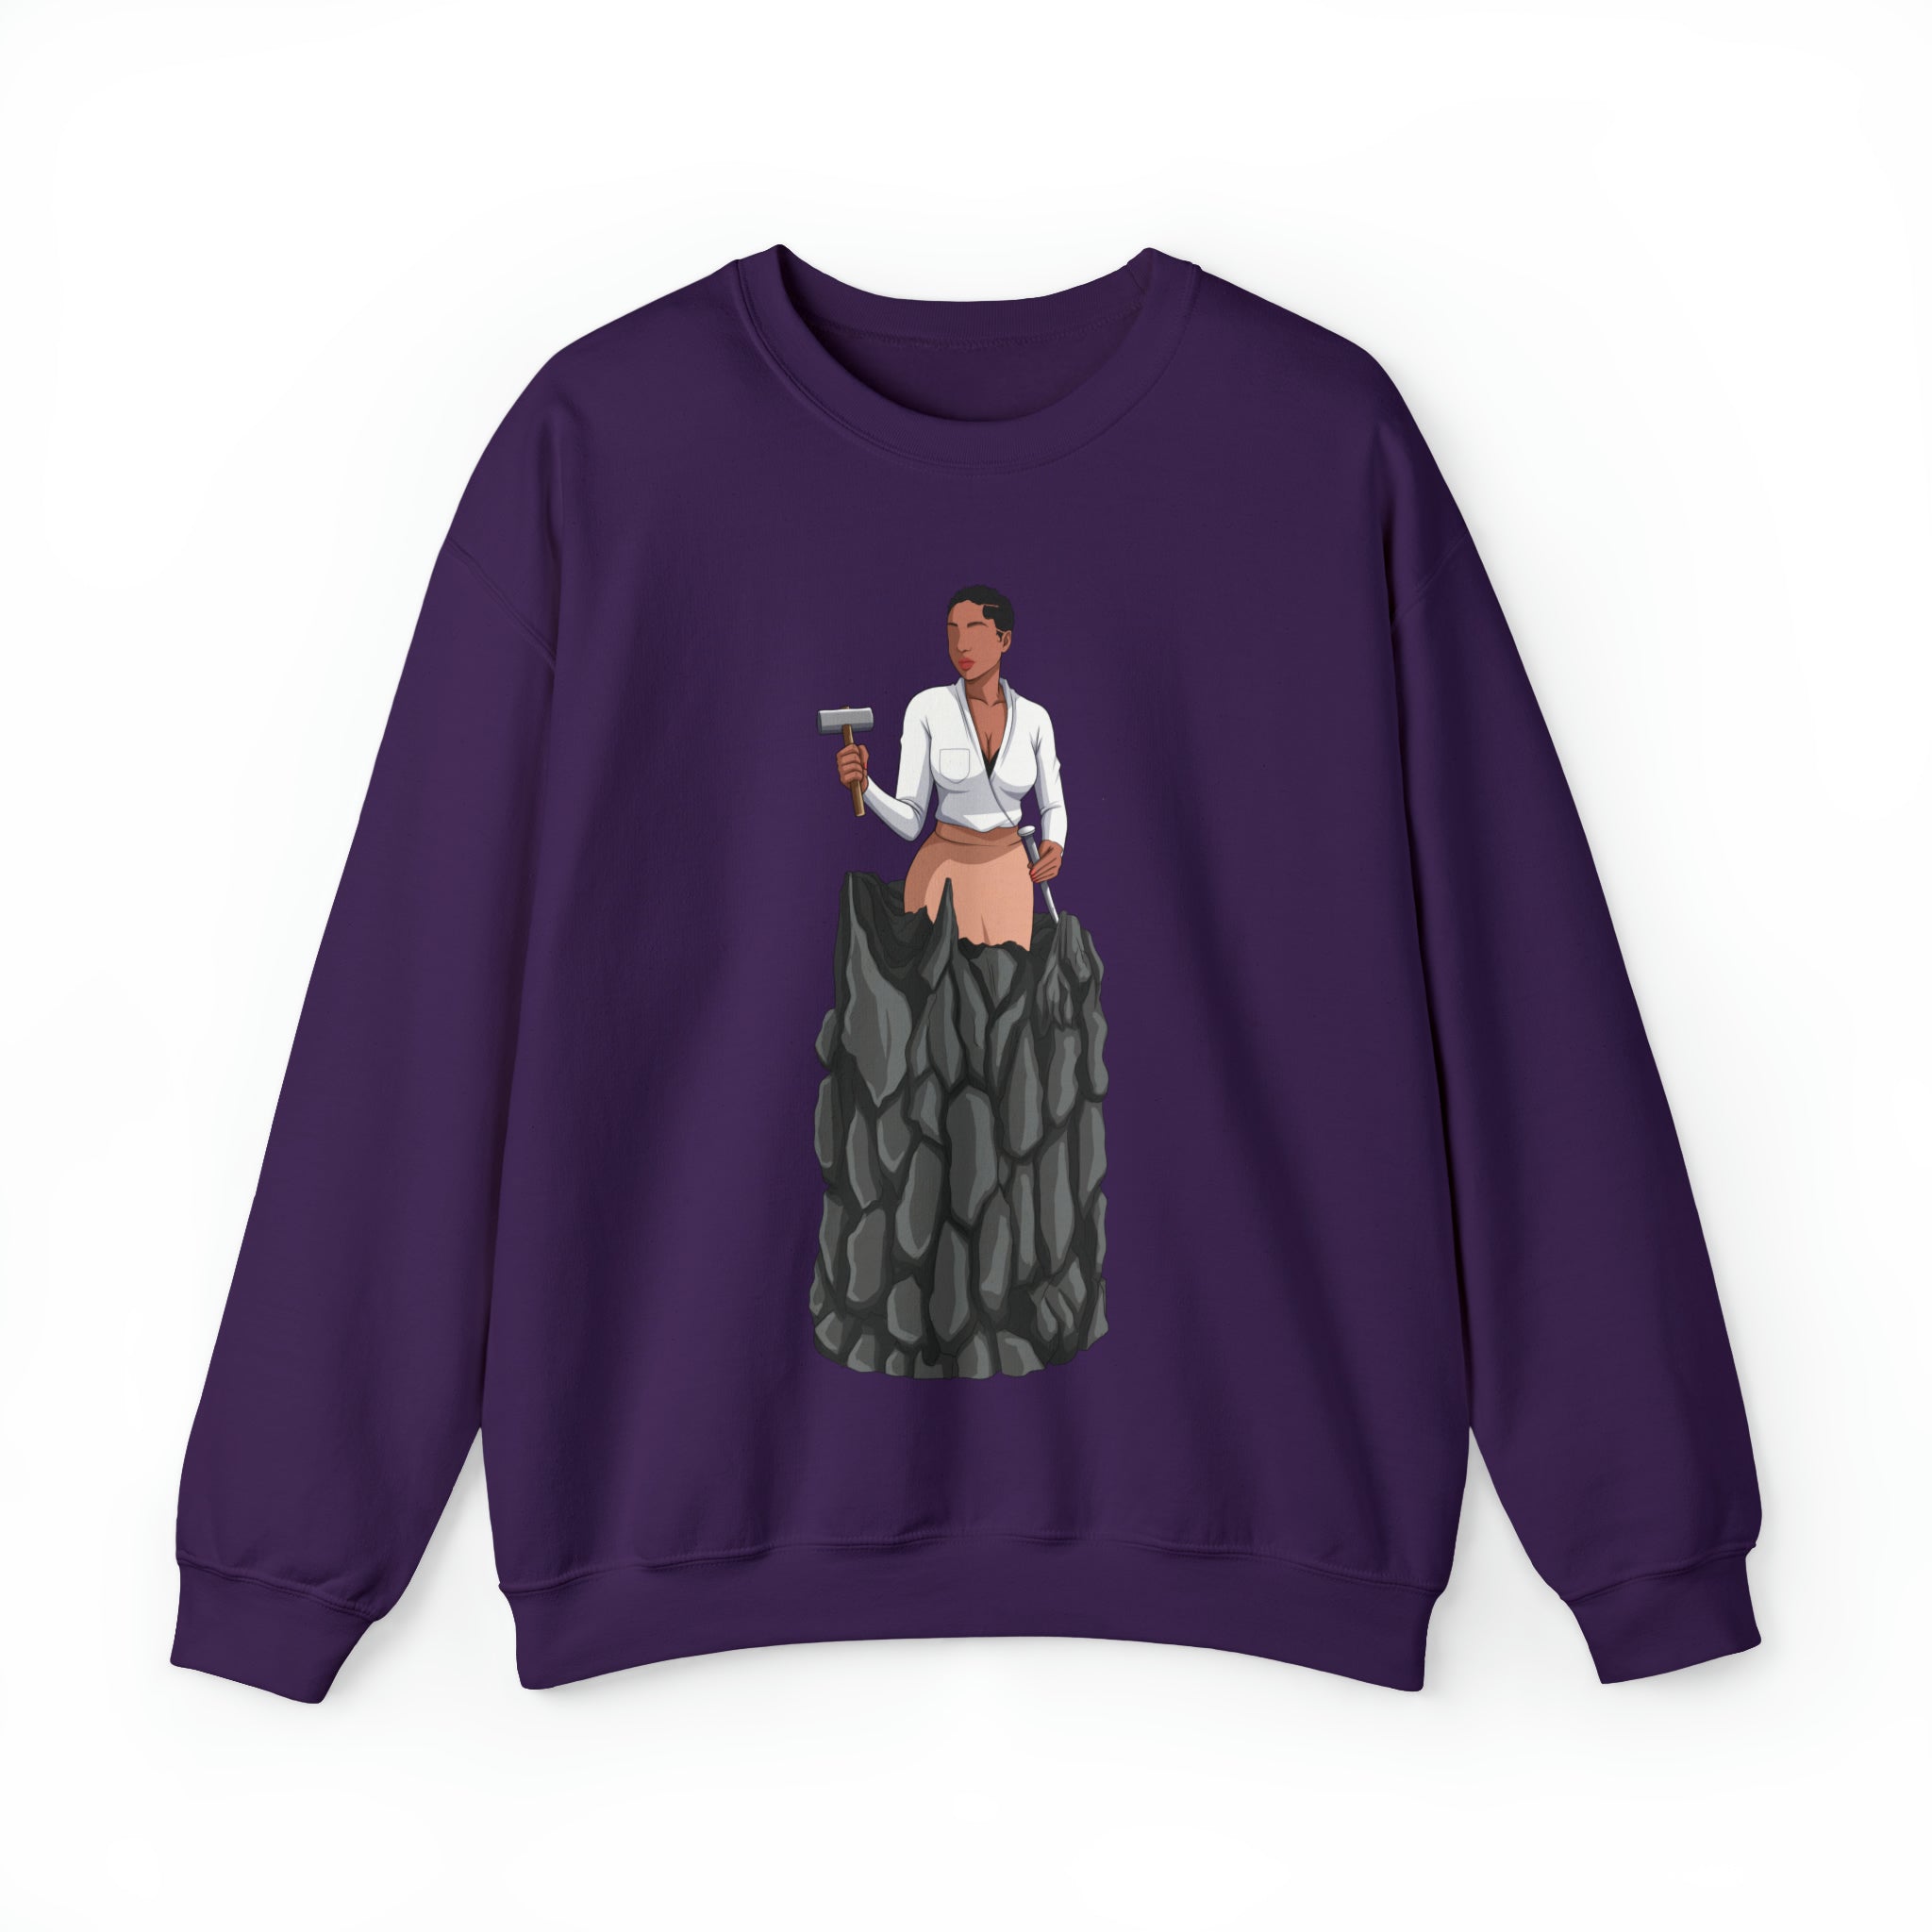 A person working hard to better his/herself - Self-Made Sweatshirt Heavy Blend™ Crewneck - woman #1 - Breakthrough Collection